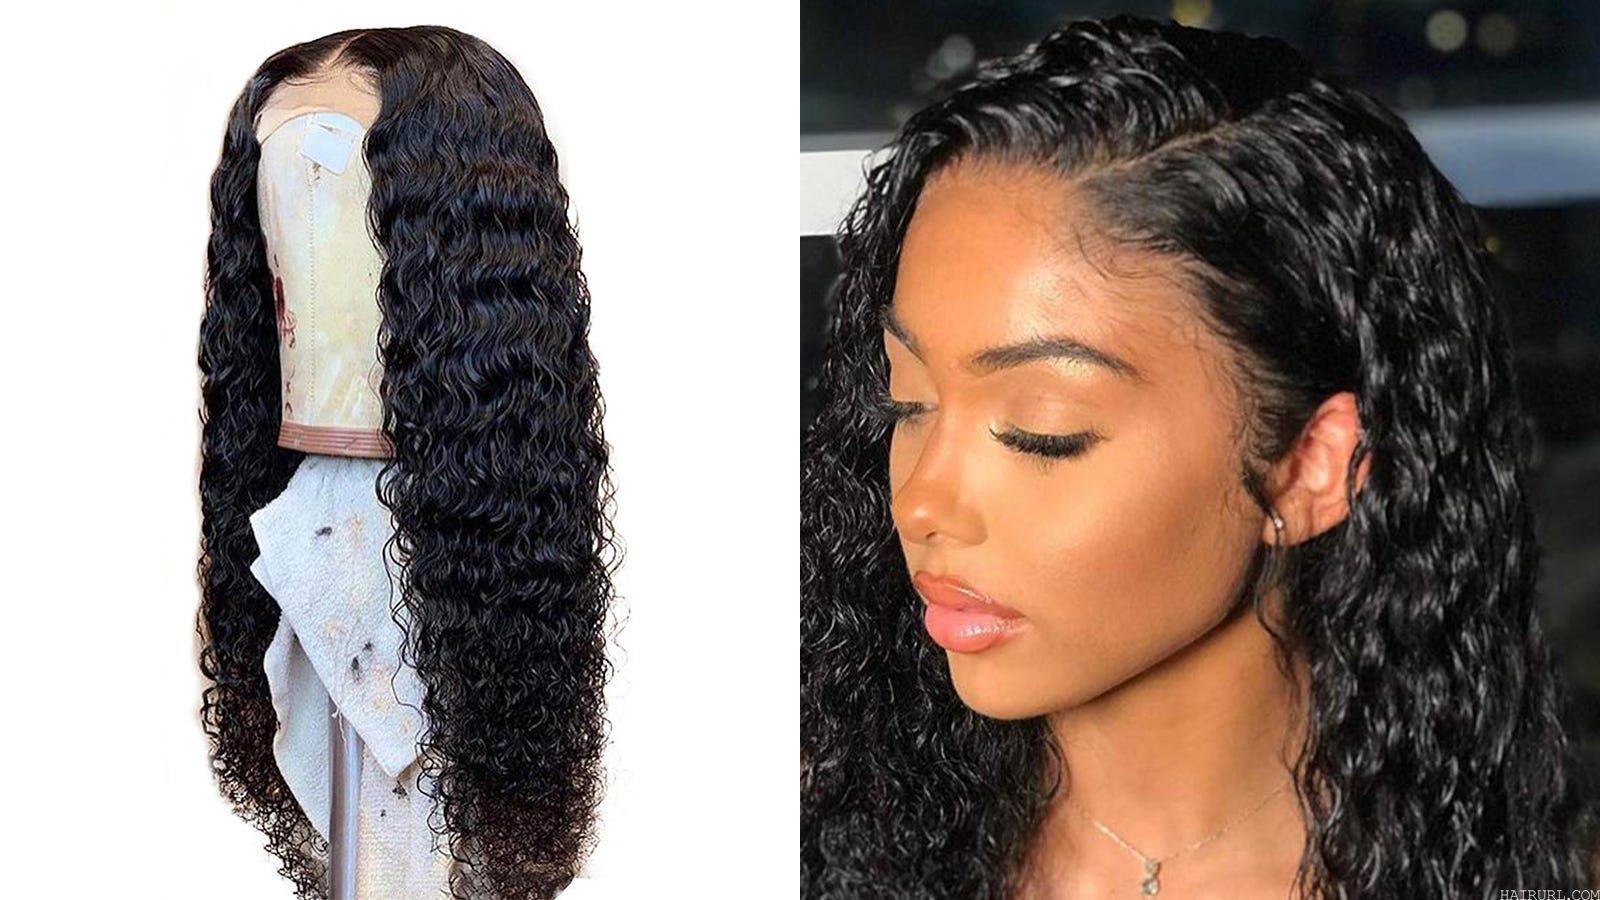 Get a natural-looking style with this curly Pizazz wig.